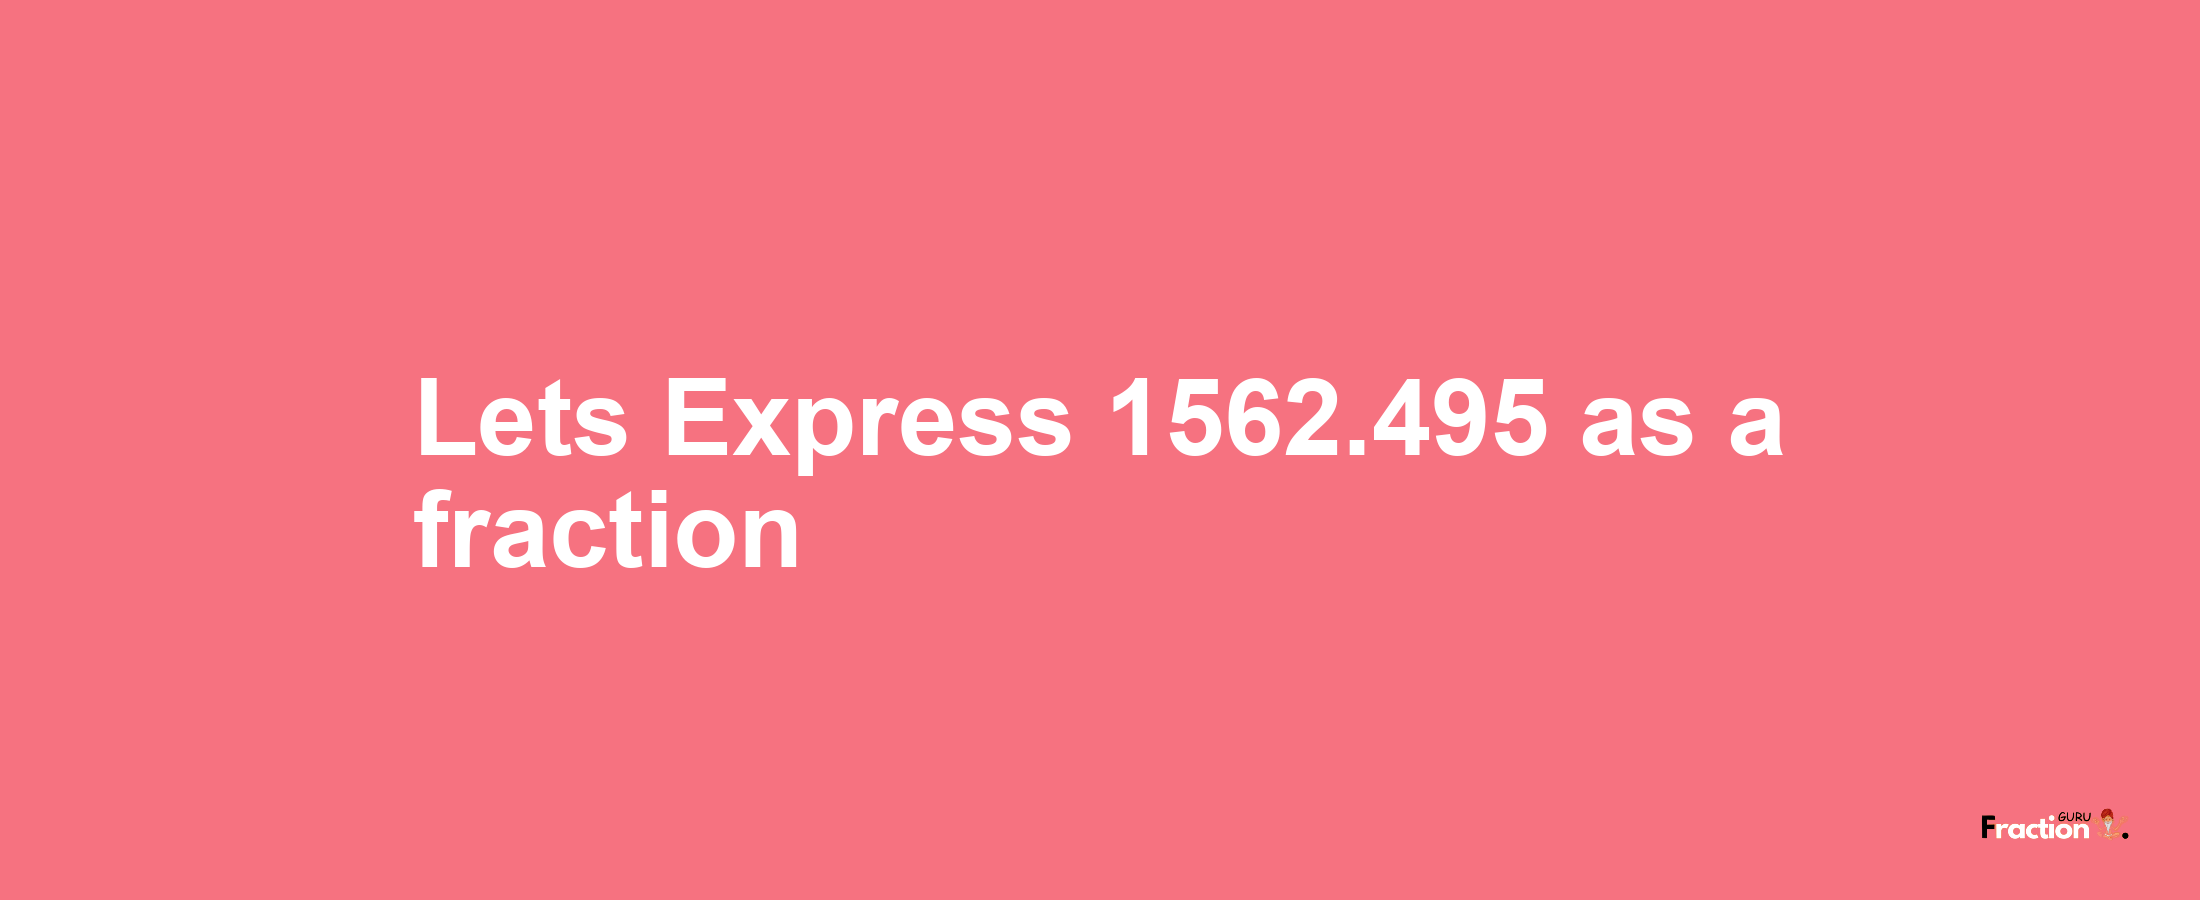 Lets Express 1562.495 as afraction